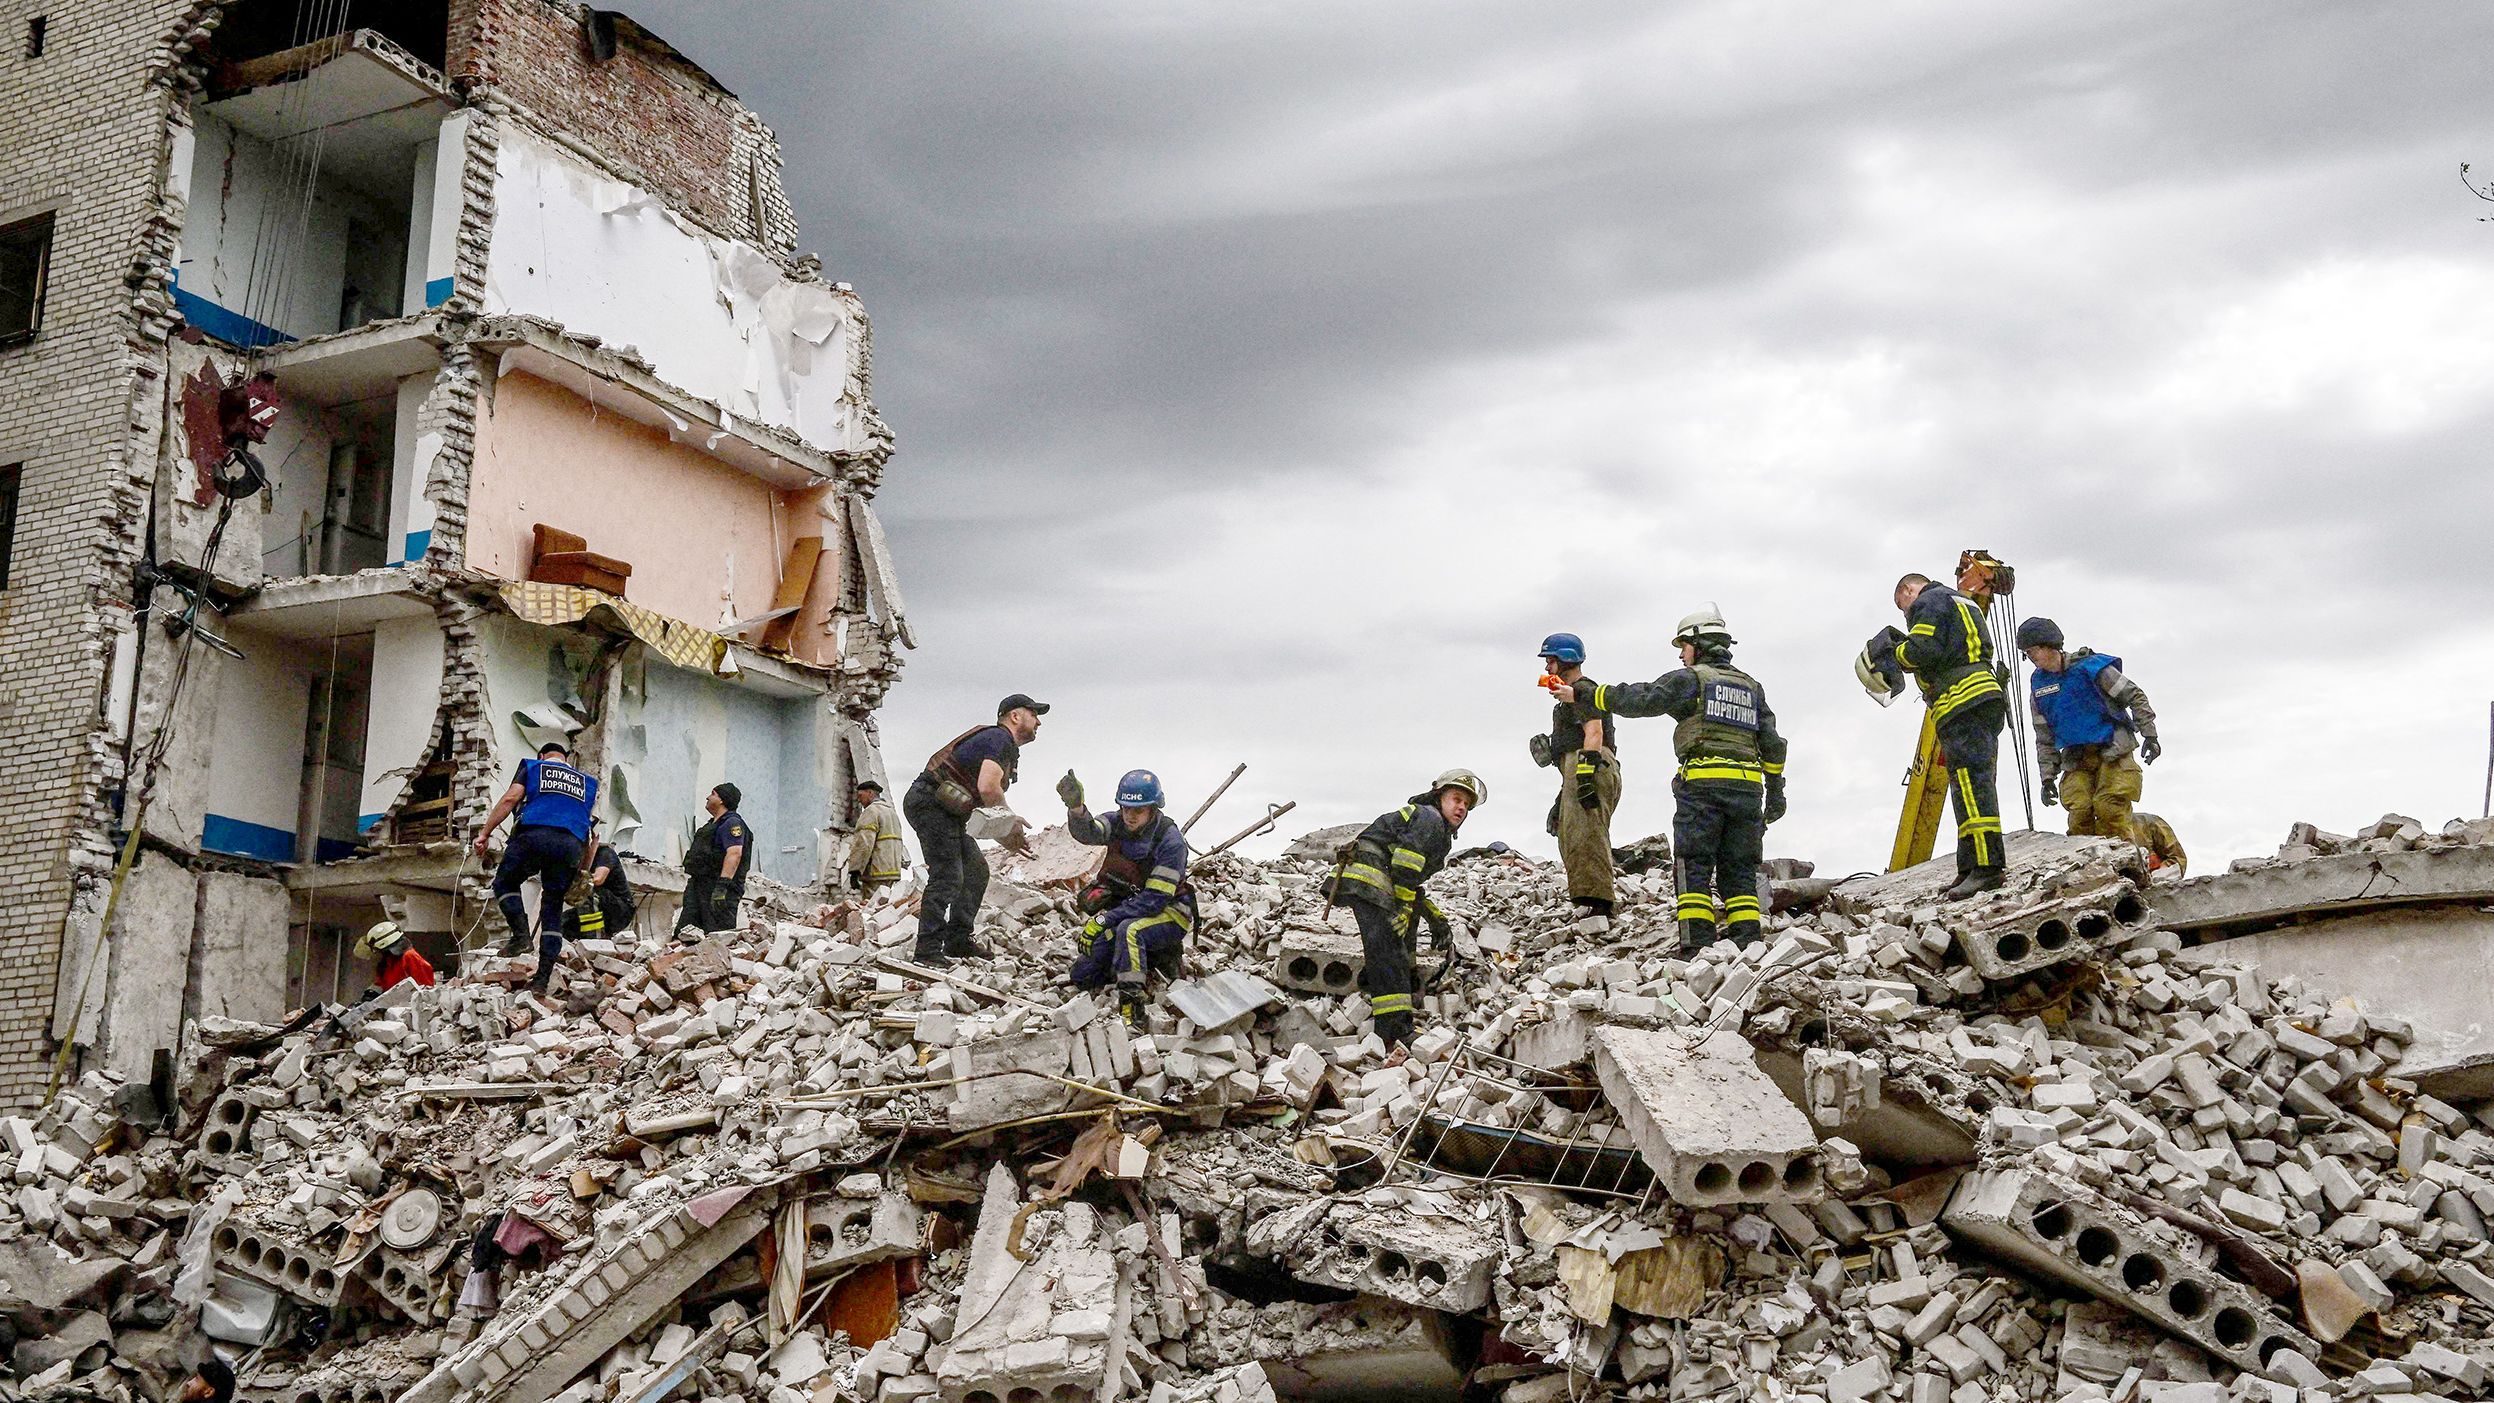 Firefighters and members of a rescue team clear the scene after a building was shelled in Chasiv Yar, eastern Ukraine, on July 10. <a href="https://edition.cnn.com/2022/07/10/europe/ukraine-russia-donetsk-attack-intl/index.html" target="_blank">At least 29 people have been confirmed dead</a>.